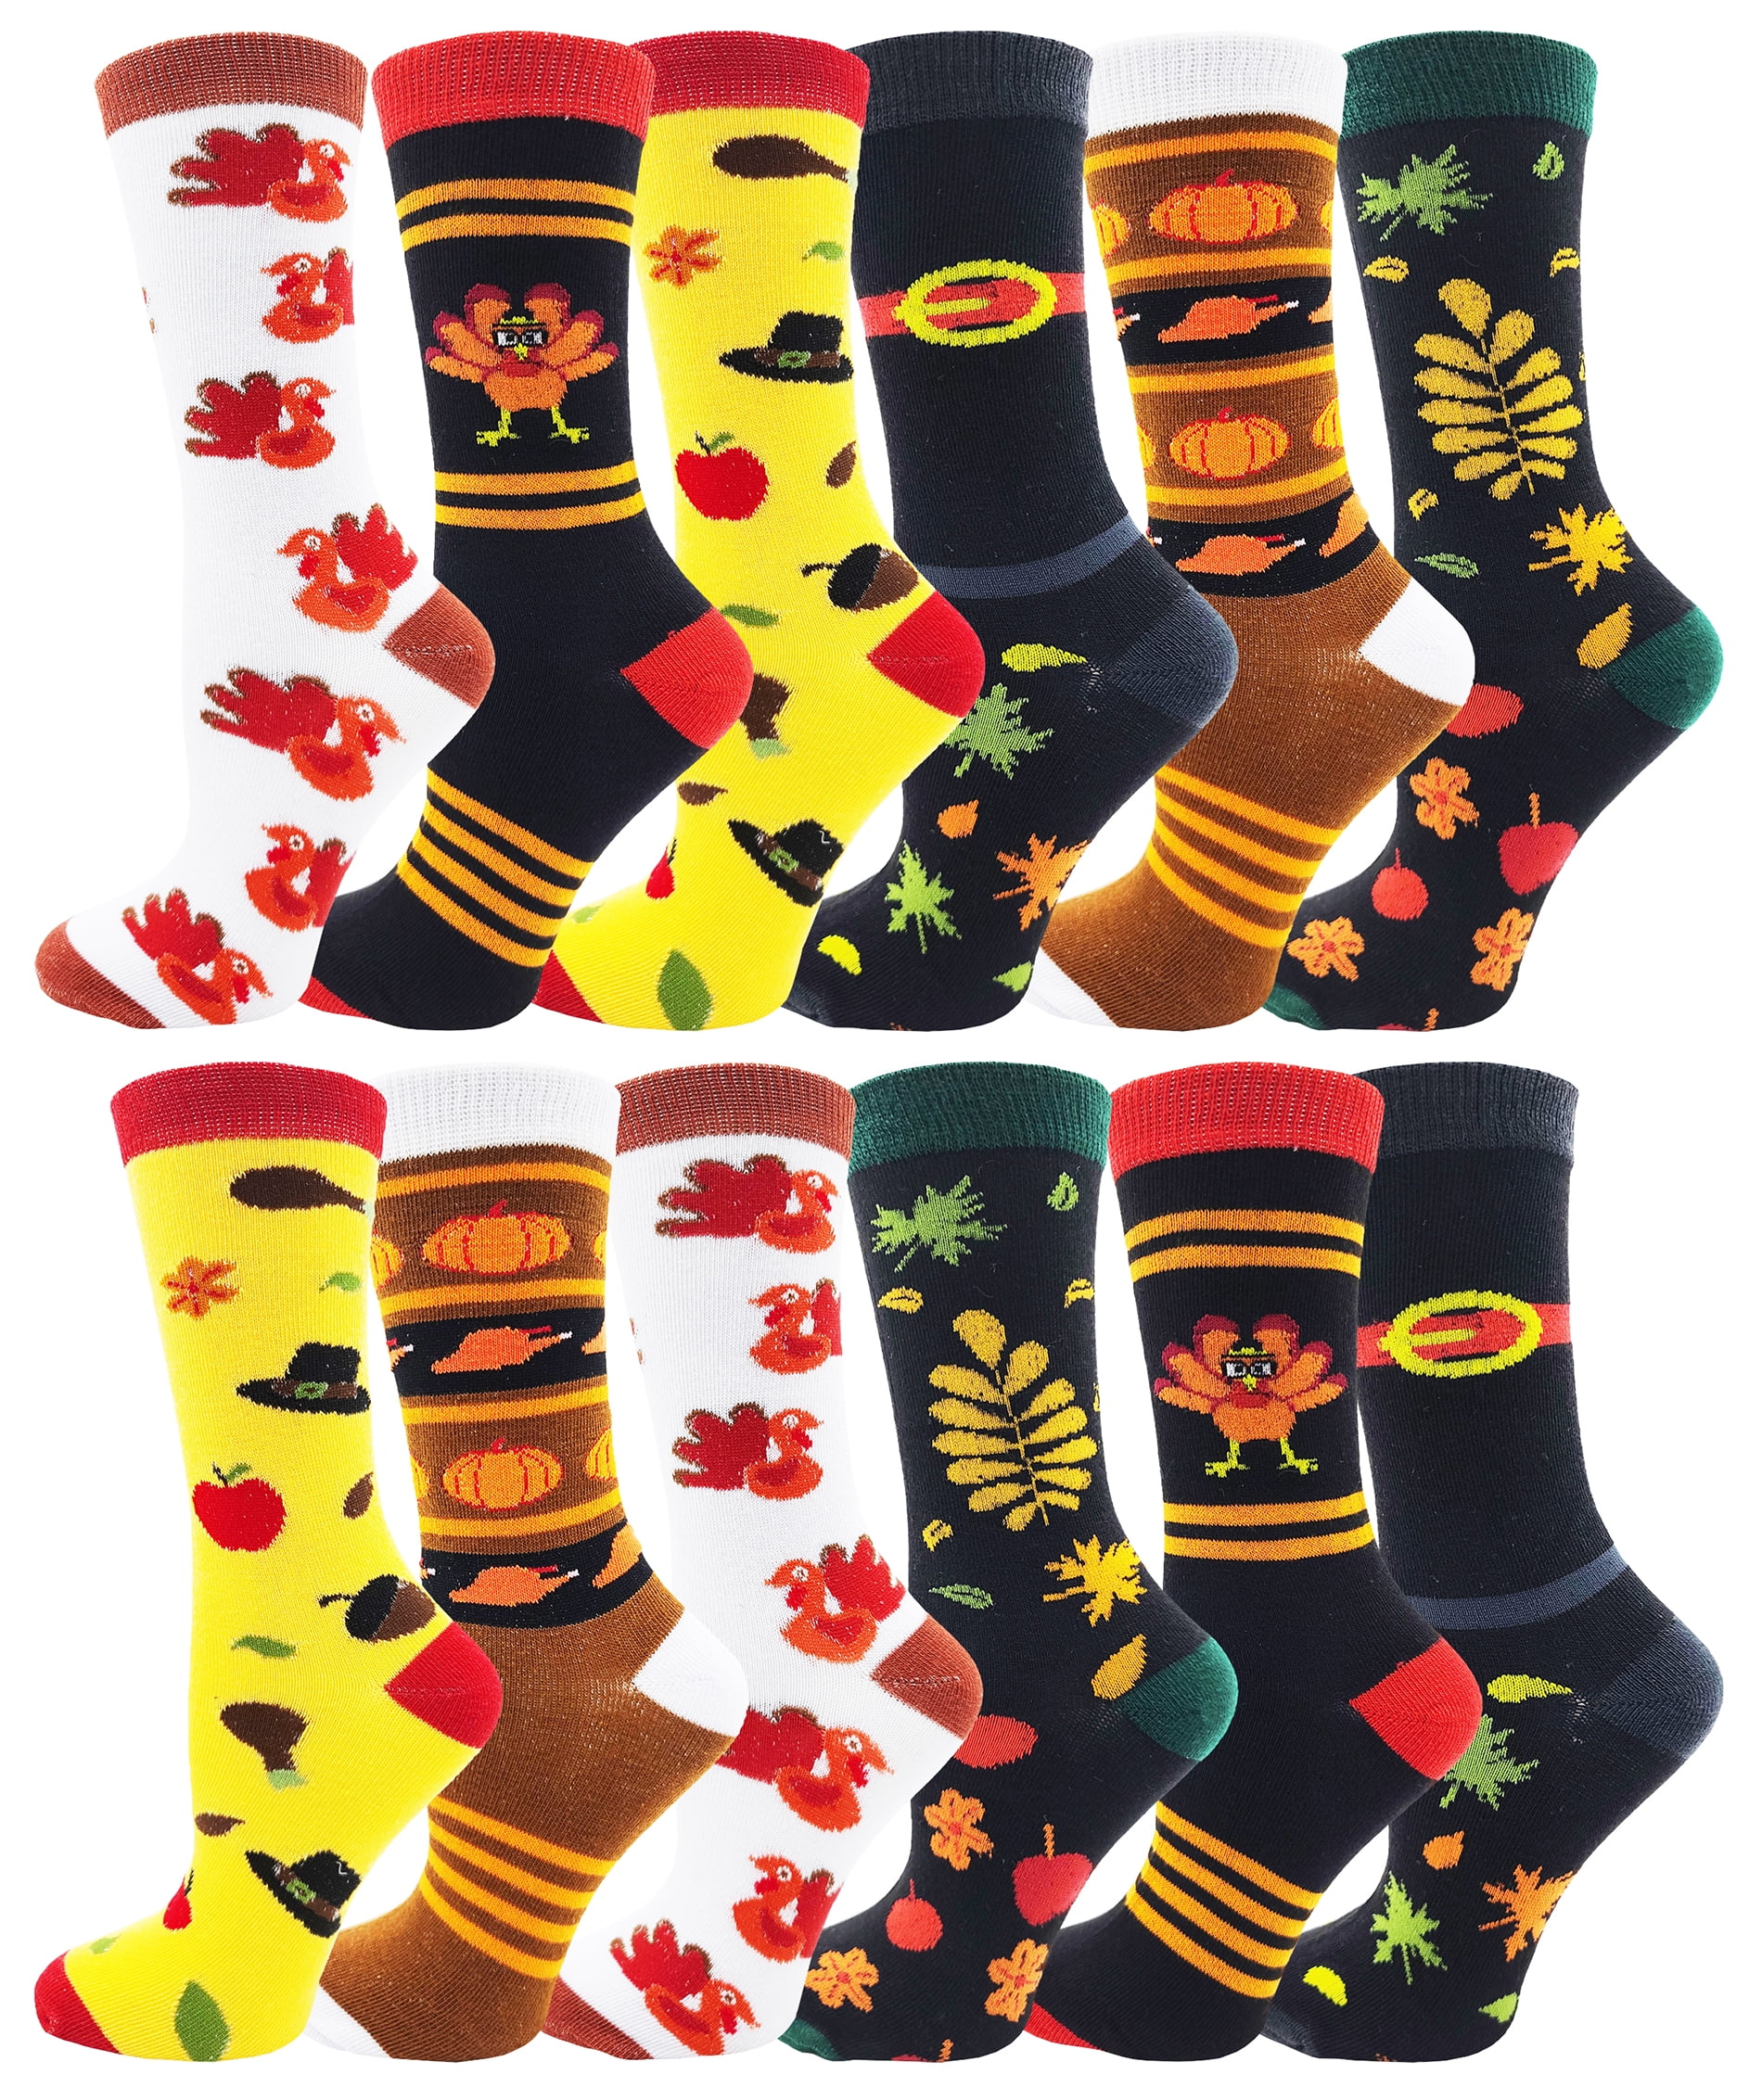 Thanksgiving Funny Turkey Compression Socks Unisex Printed Socks Crazy Patterned Fun Long Cotton Socks Over The Calf Tube